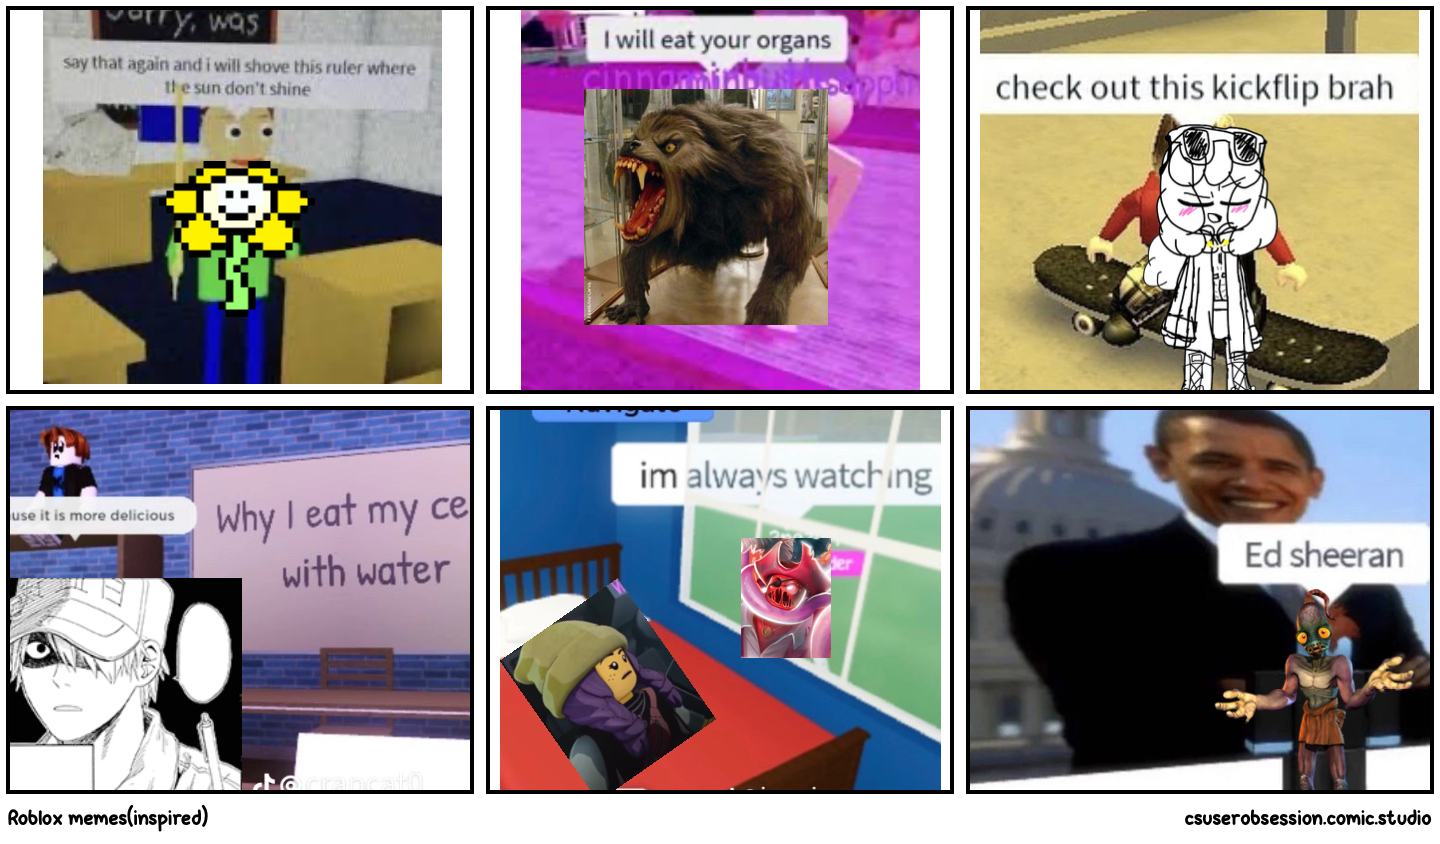 Roblox memes(inspired)